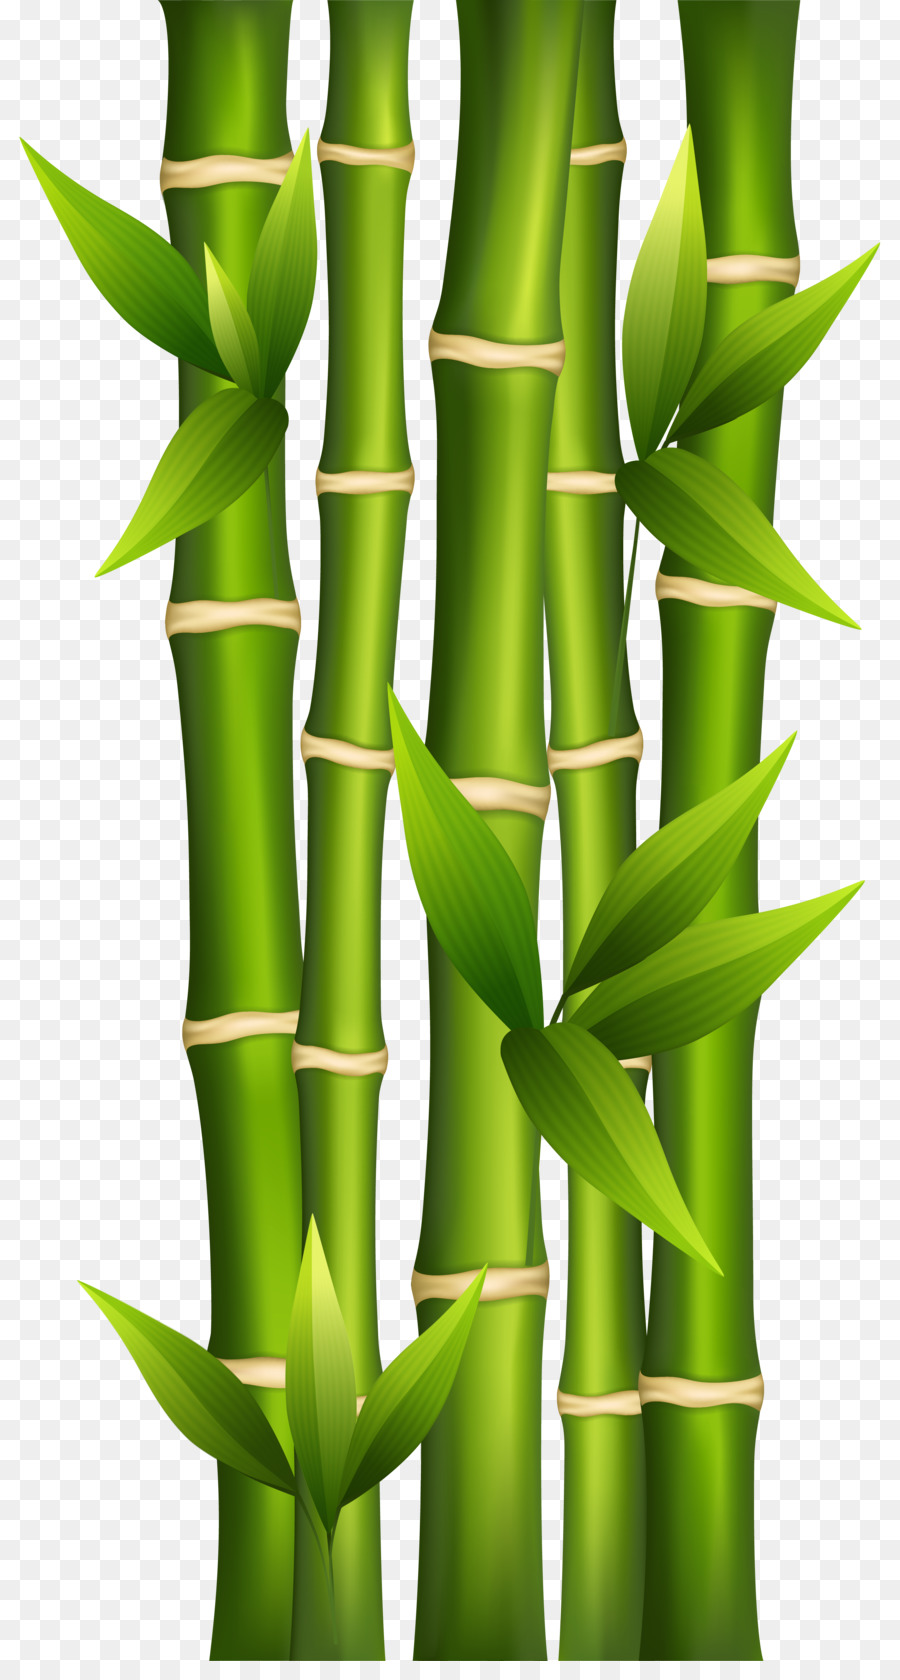 Bamboo shoot Plant stem Clip art - Bamboo Background Cliparts png download - 2787*5144 - Free Transparent Bamboo png Download.